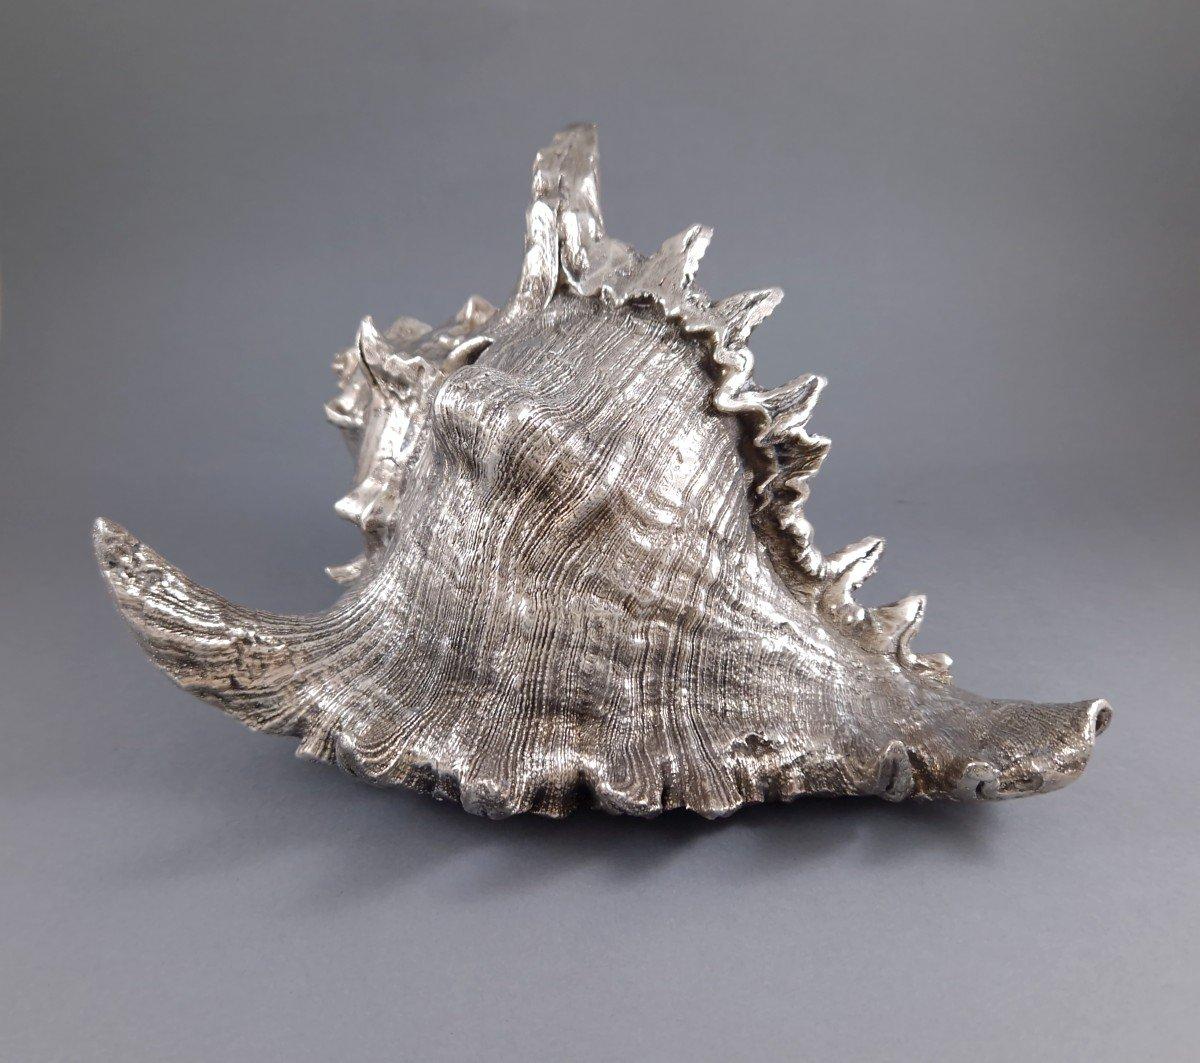 Italian Buccellati - Large Mounted Shell In Sterling Silver